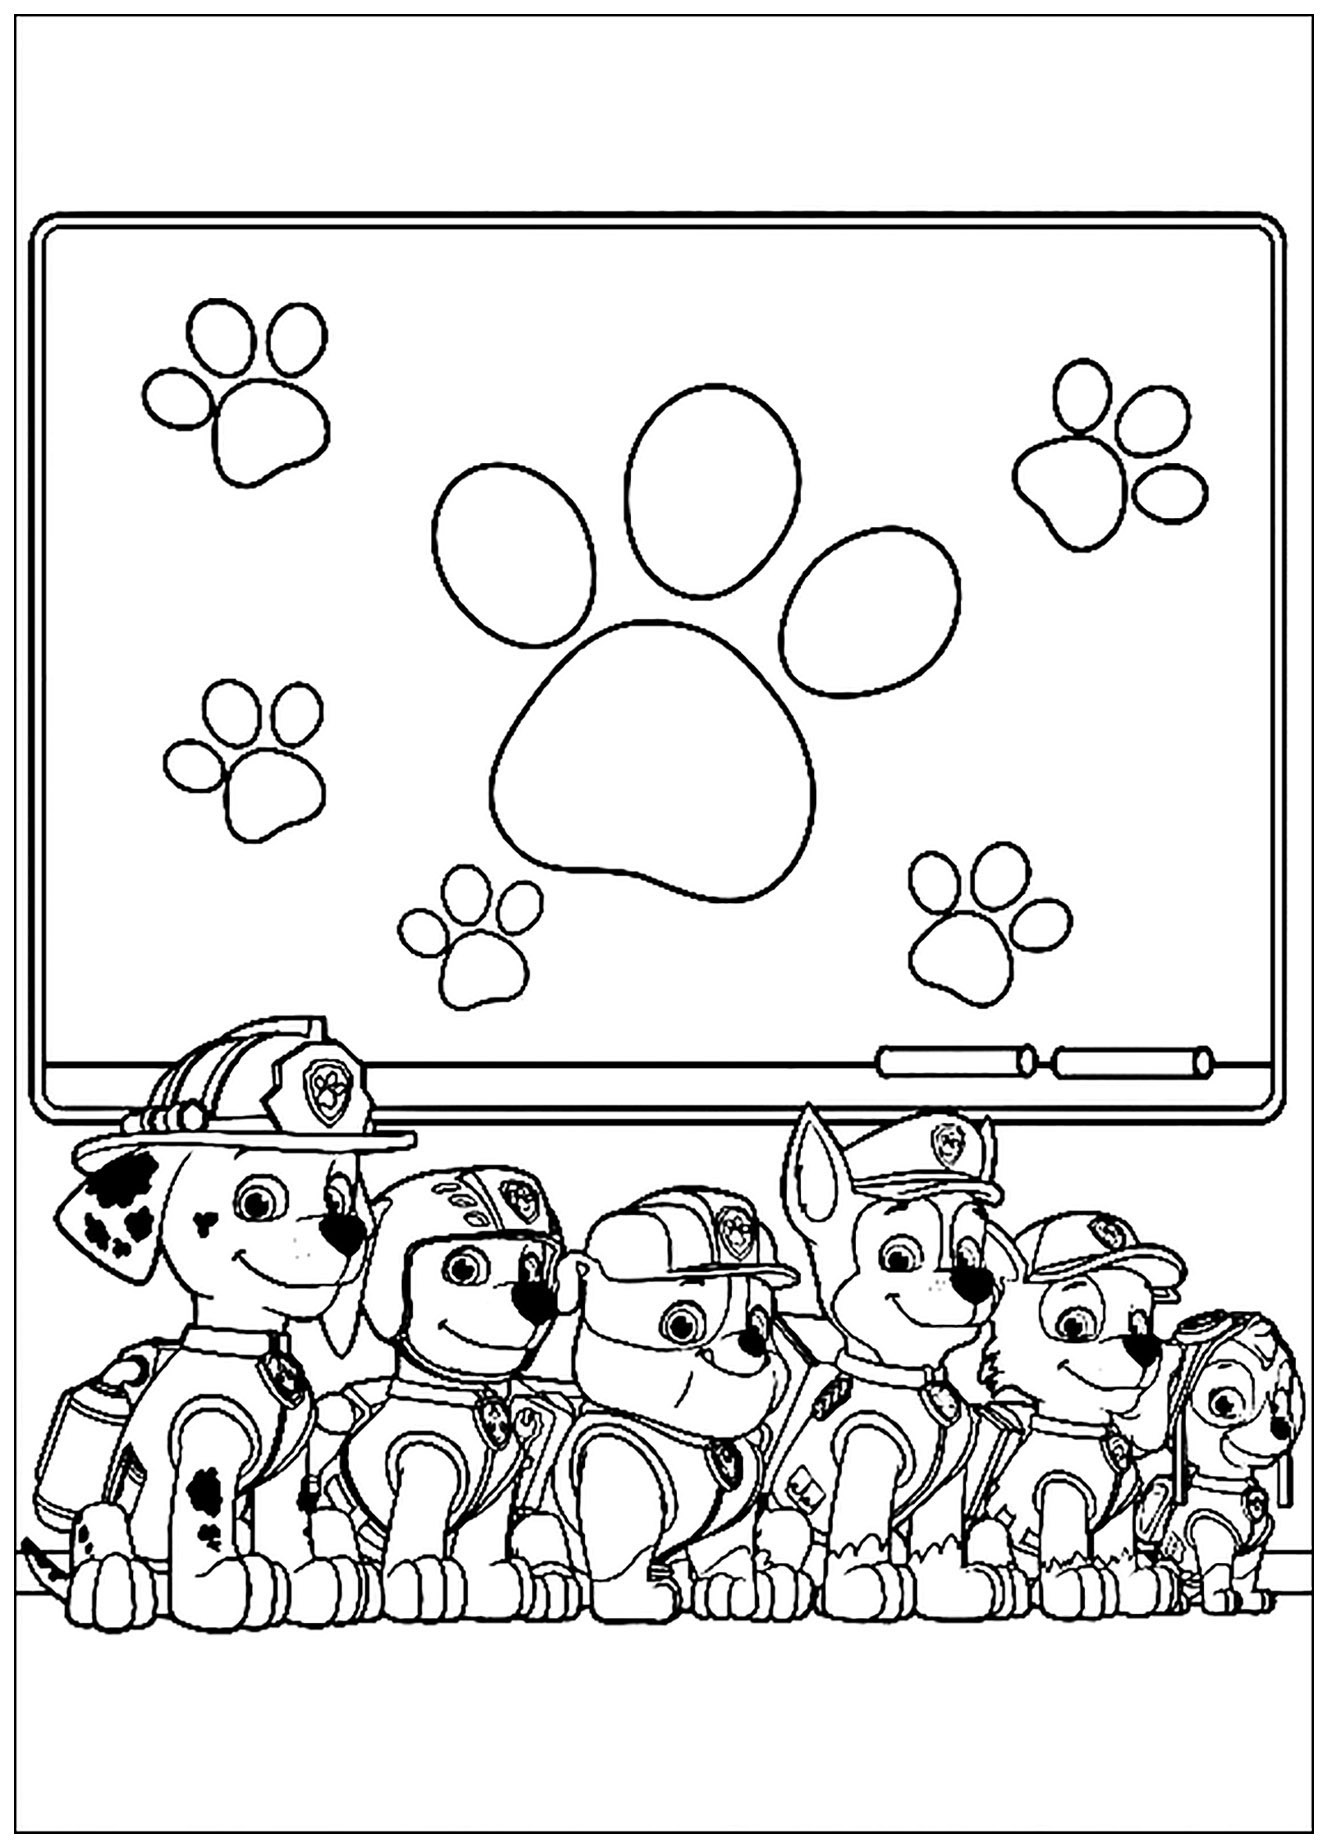 Nice simple Patrol coloring pages for kids